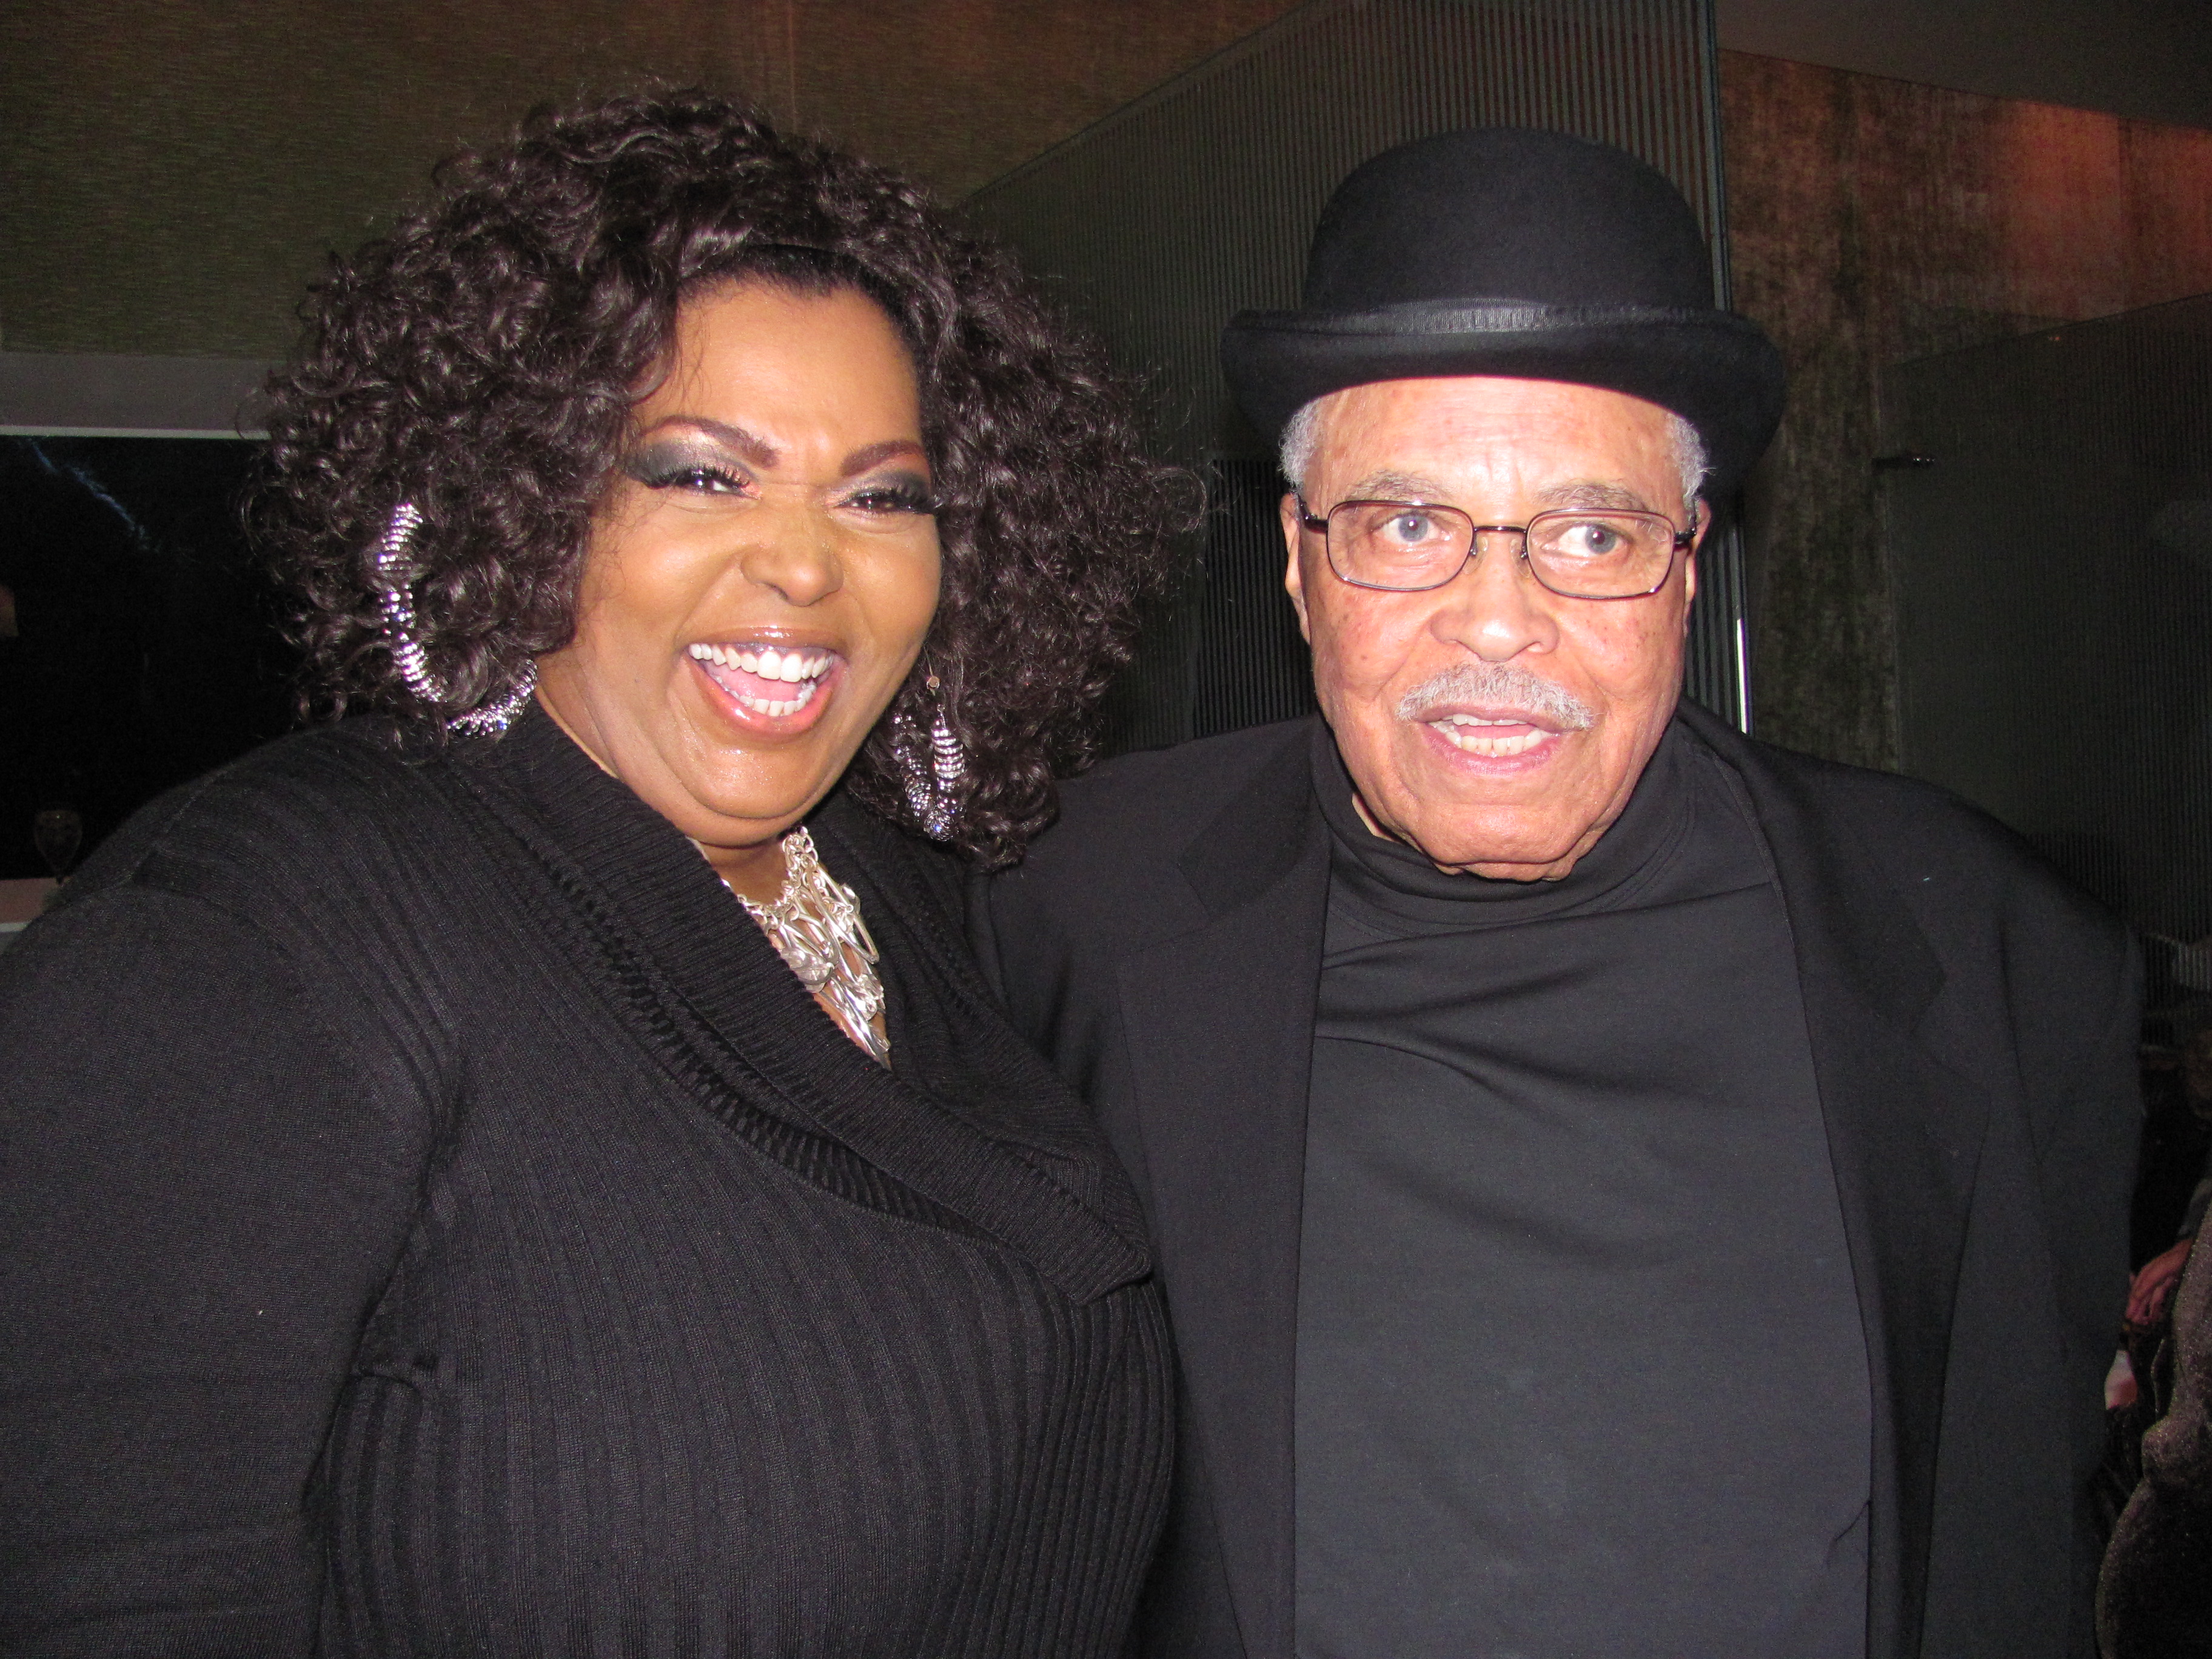 Liz and James Earl Jones at the Opening Night of the 2012 revival of Gore Vidals The Best Man.